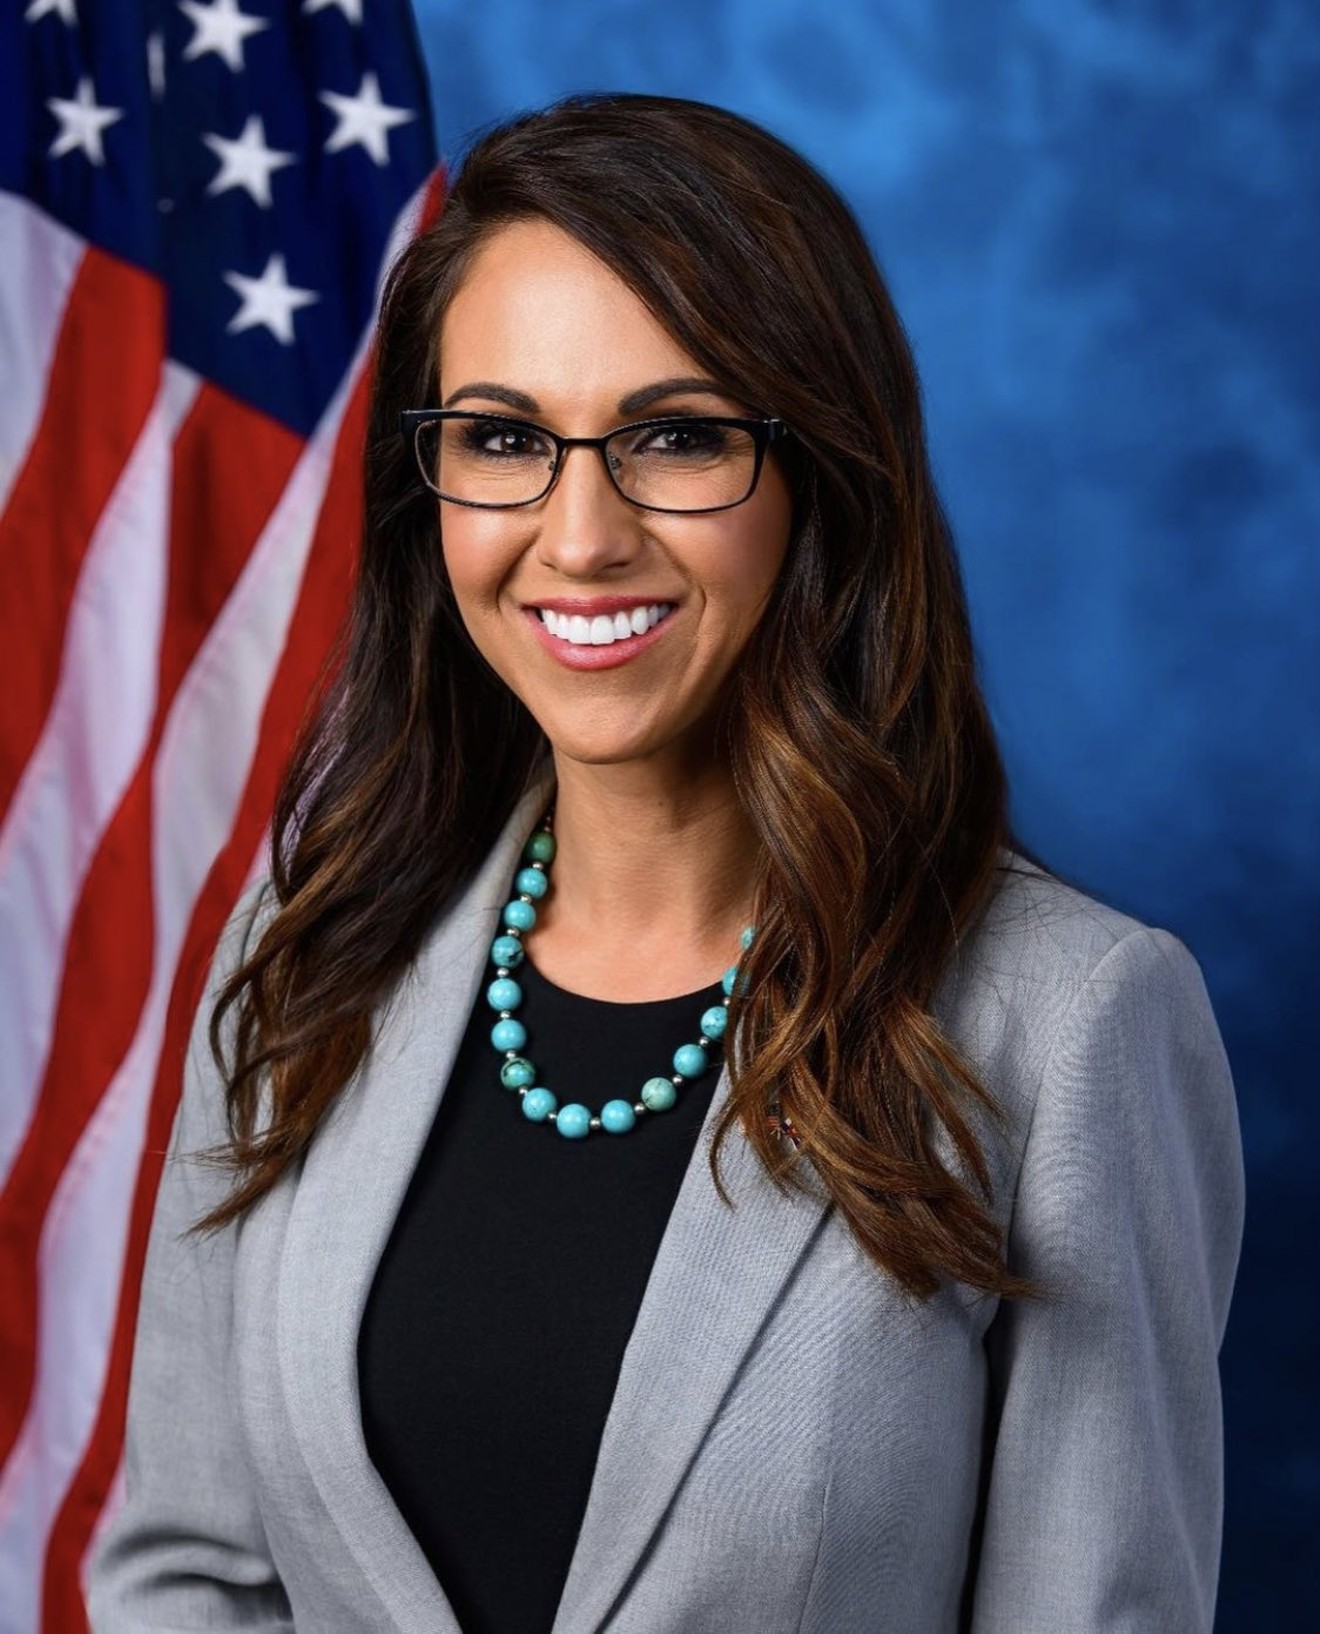 Representative Lauren Boebert, 117th U.S. Congress, who wasn't allowed to hold up her Glock for the official photo.